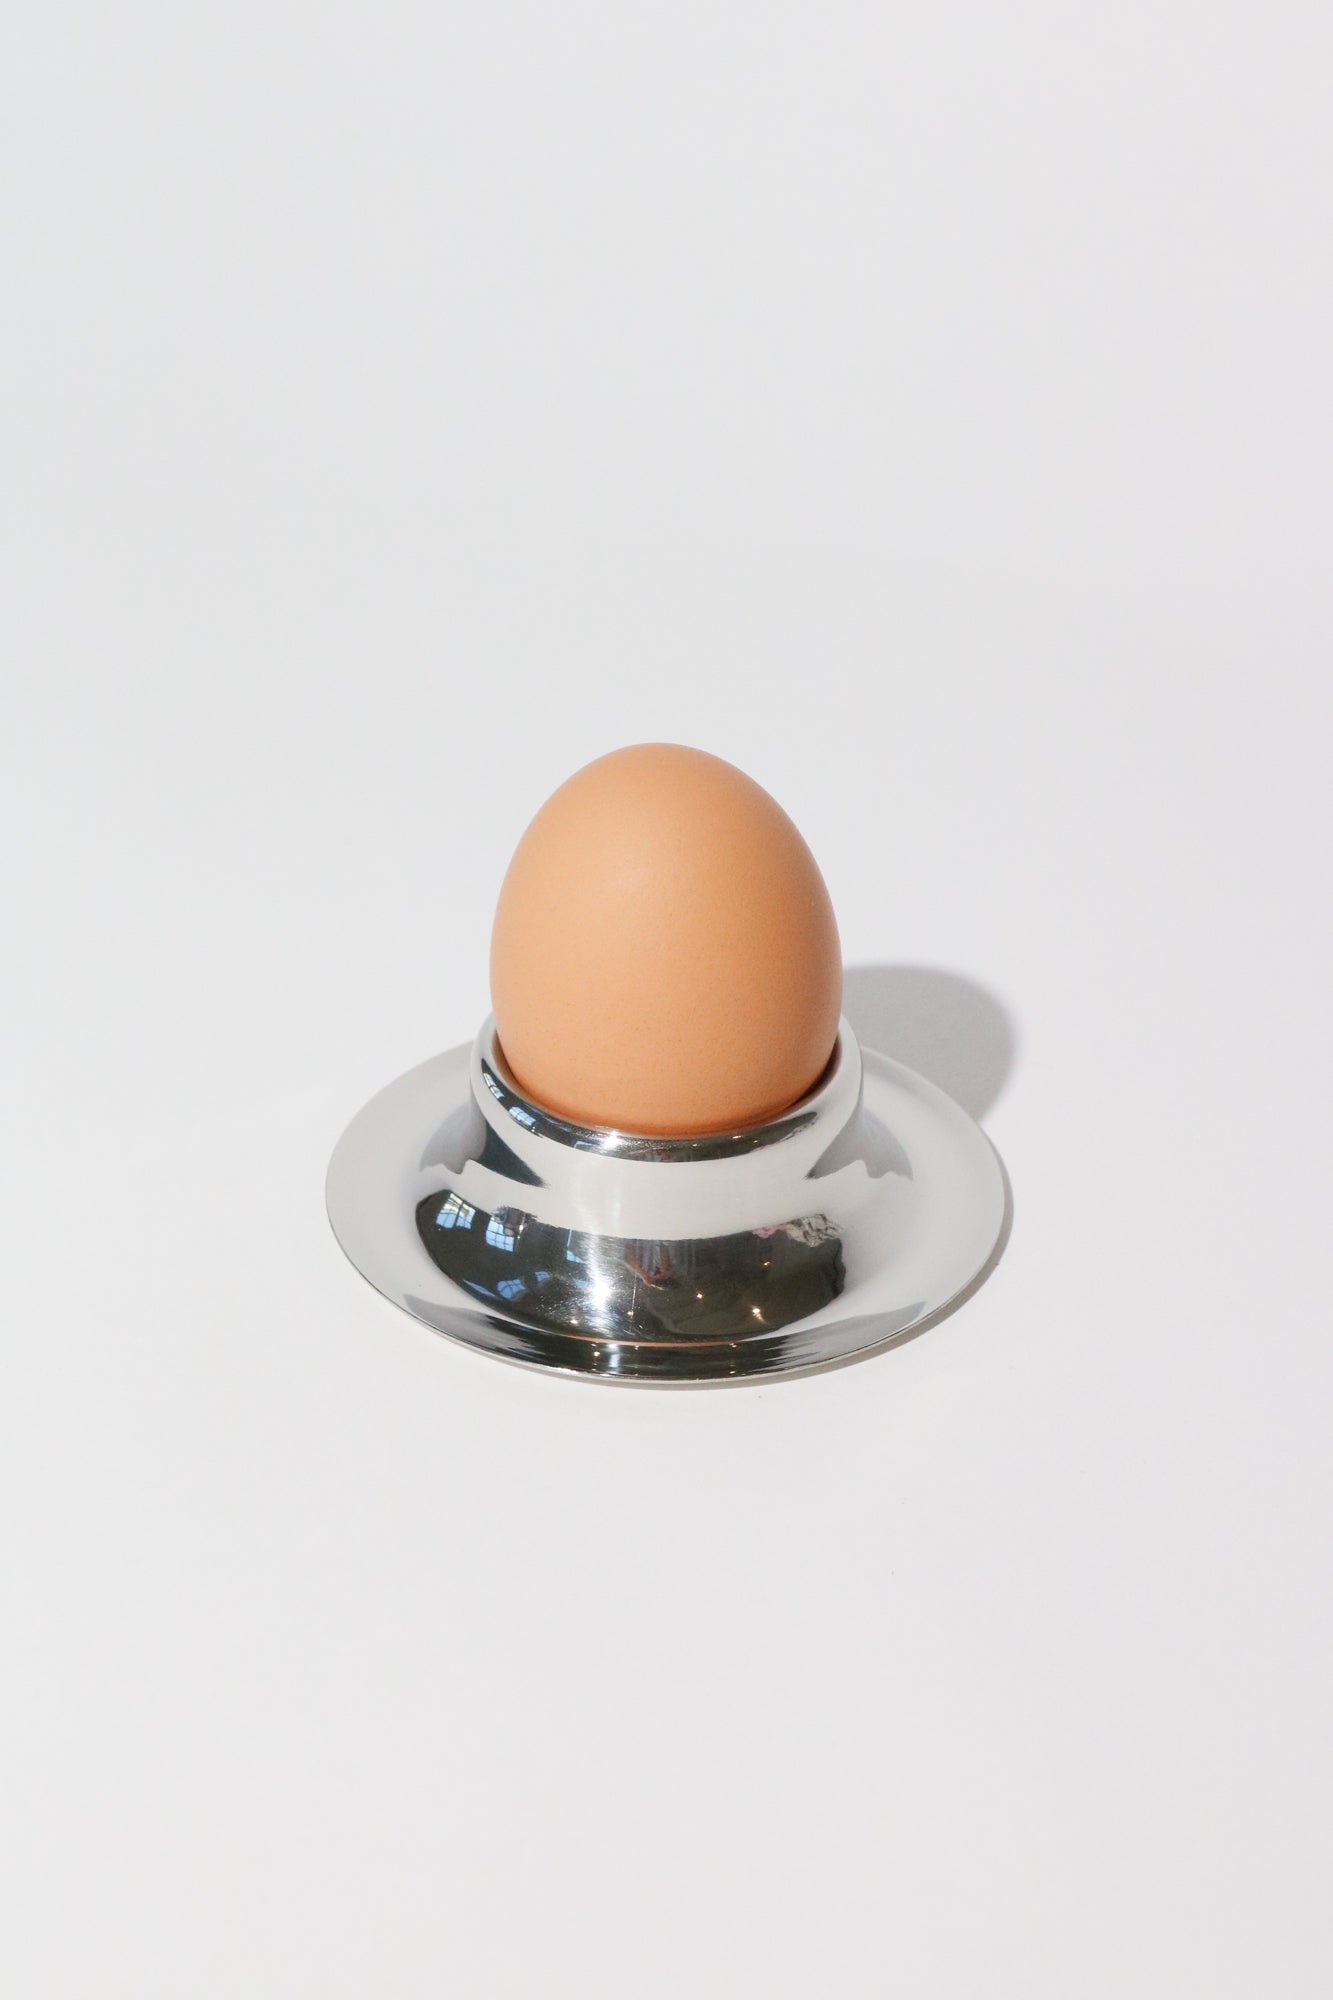 WMF-Stainless-Steel-Egg-Cups-Shop-Sommer